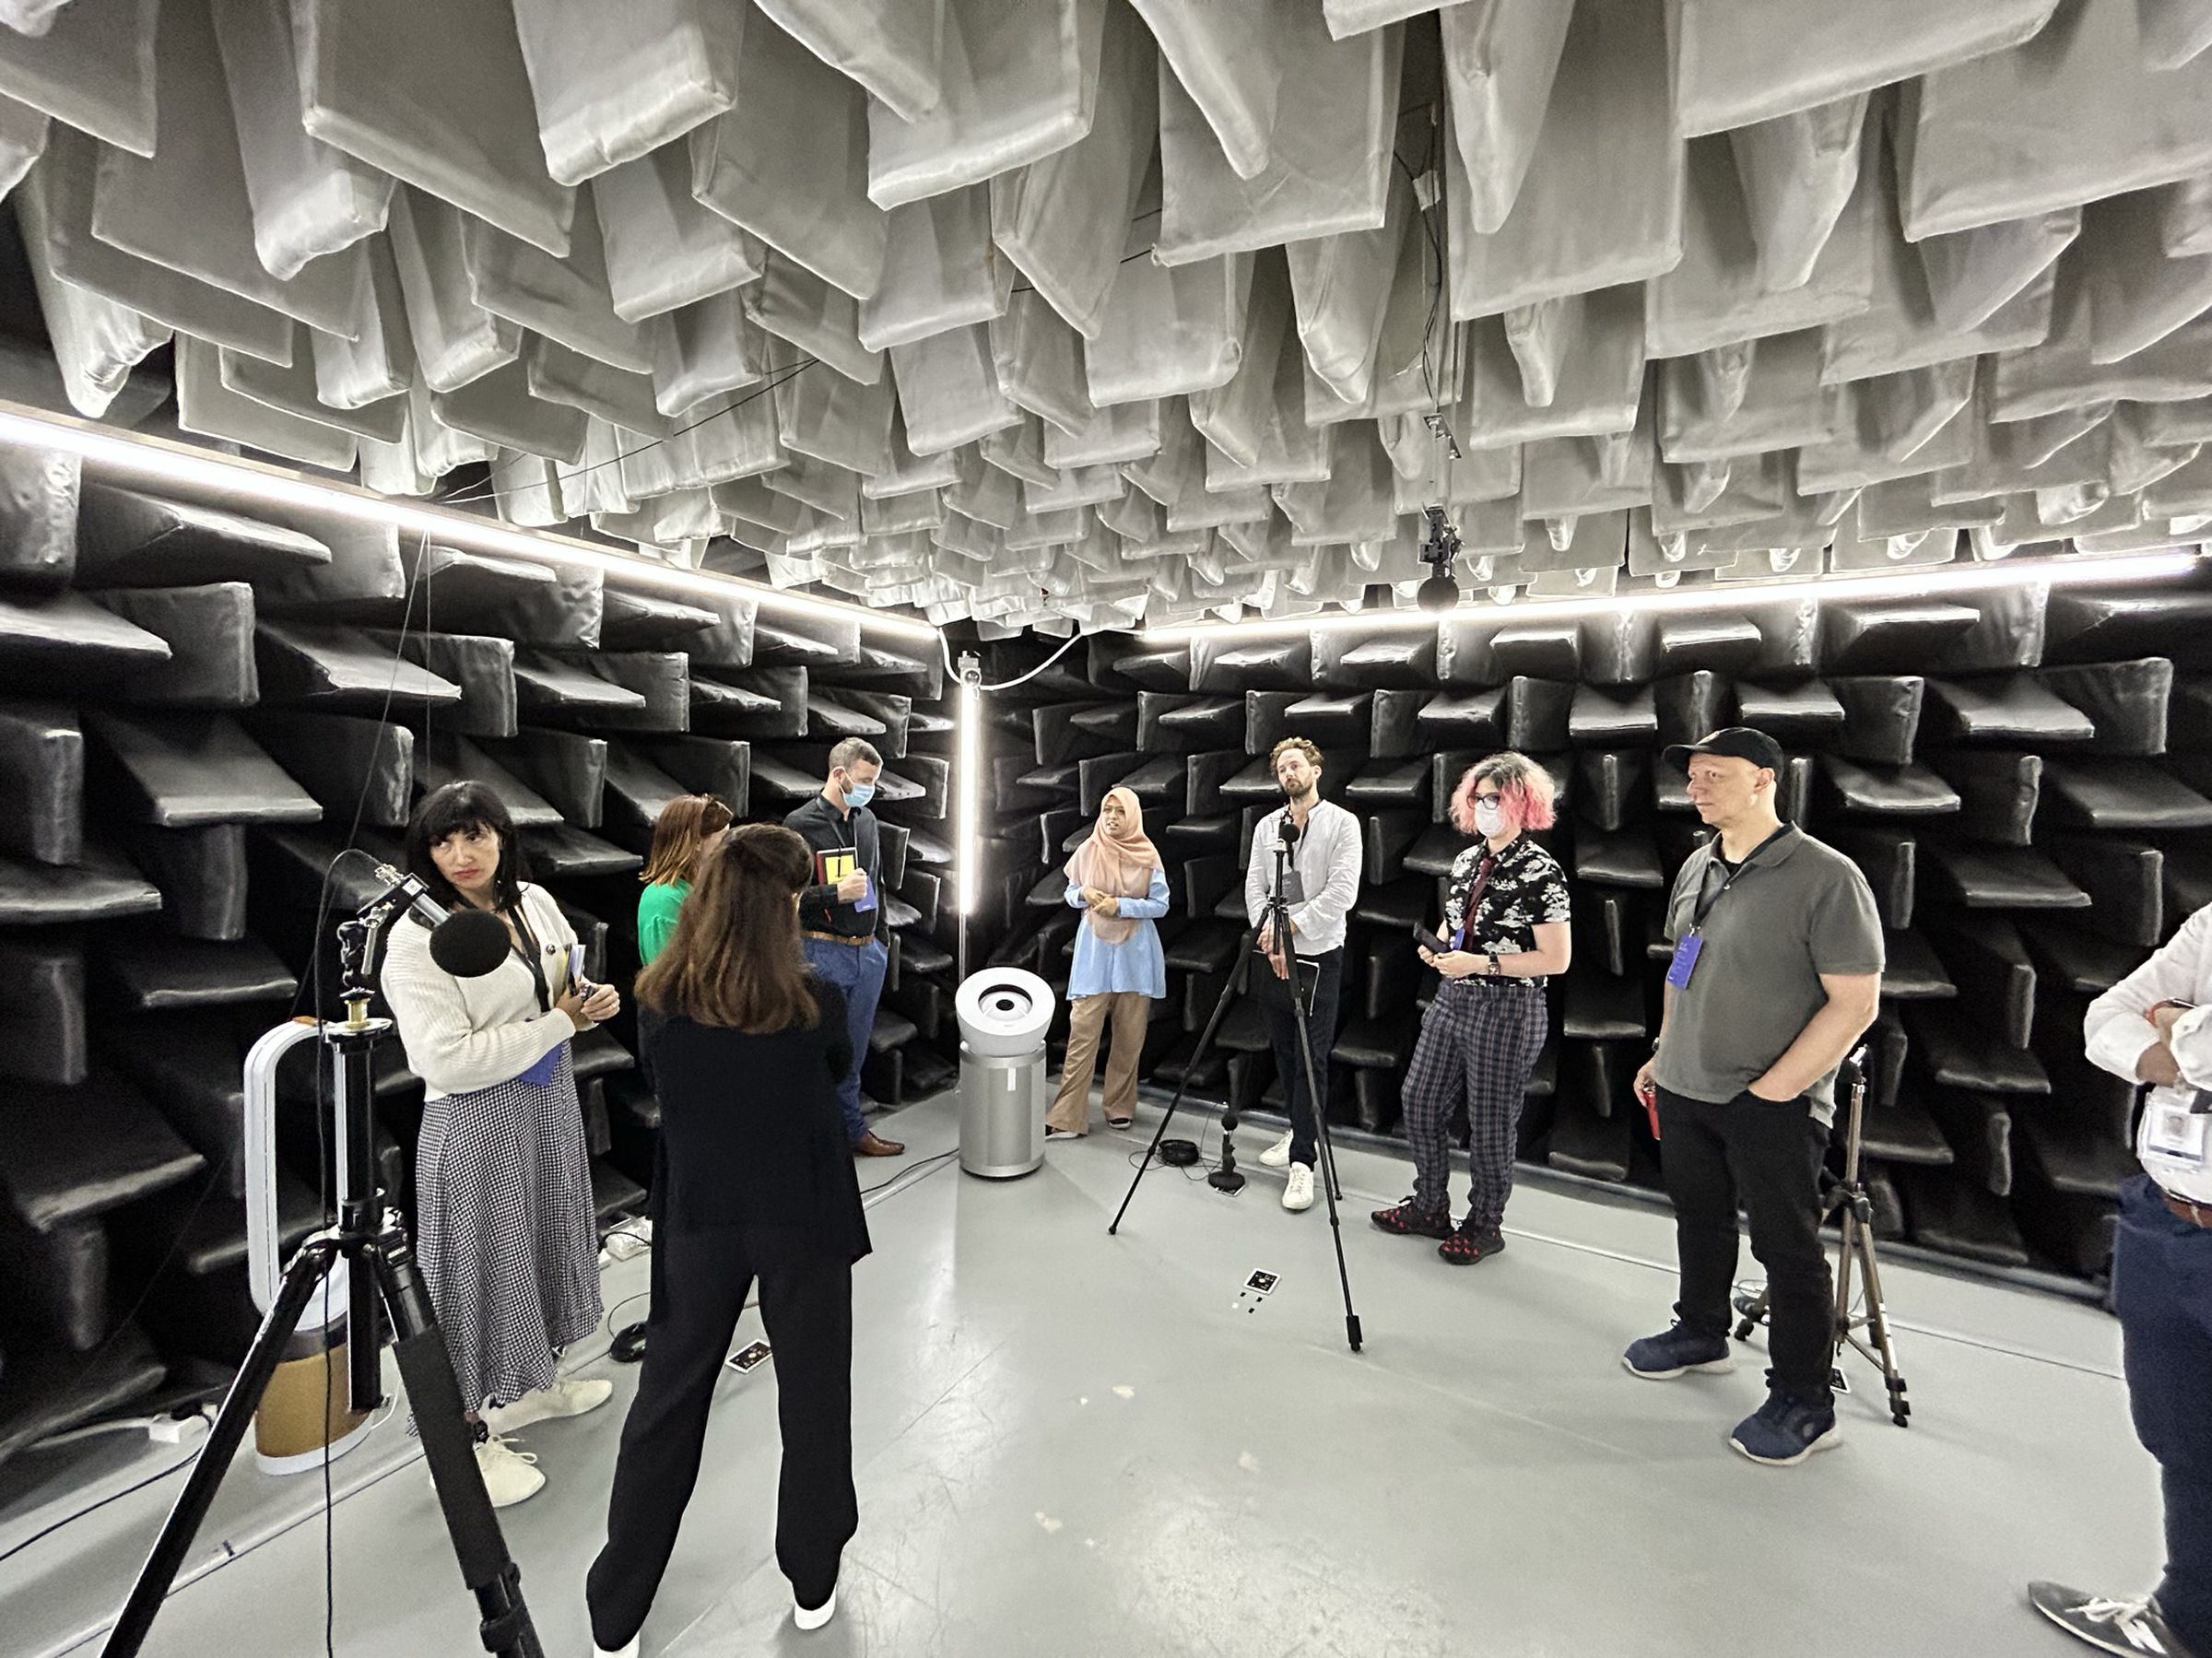 The semi-anechoic chamber where Dyson tests the noise level of its air purifiers. Dyson employees and journalists gather around a new Dyson Big + Quiet purifier in the corner.